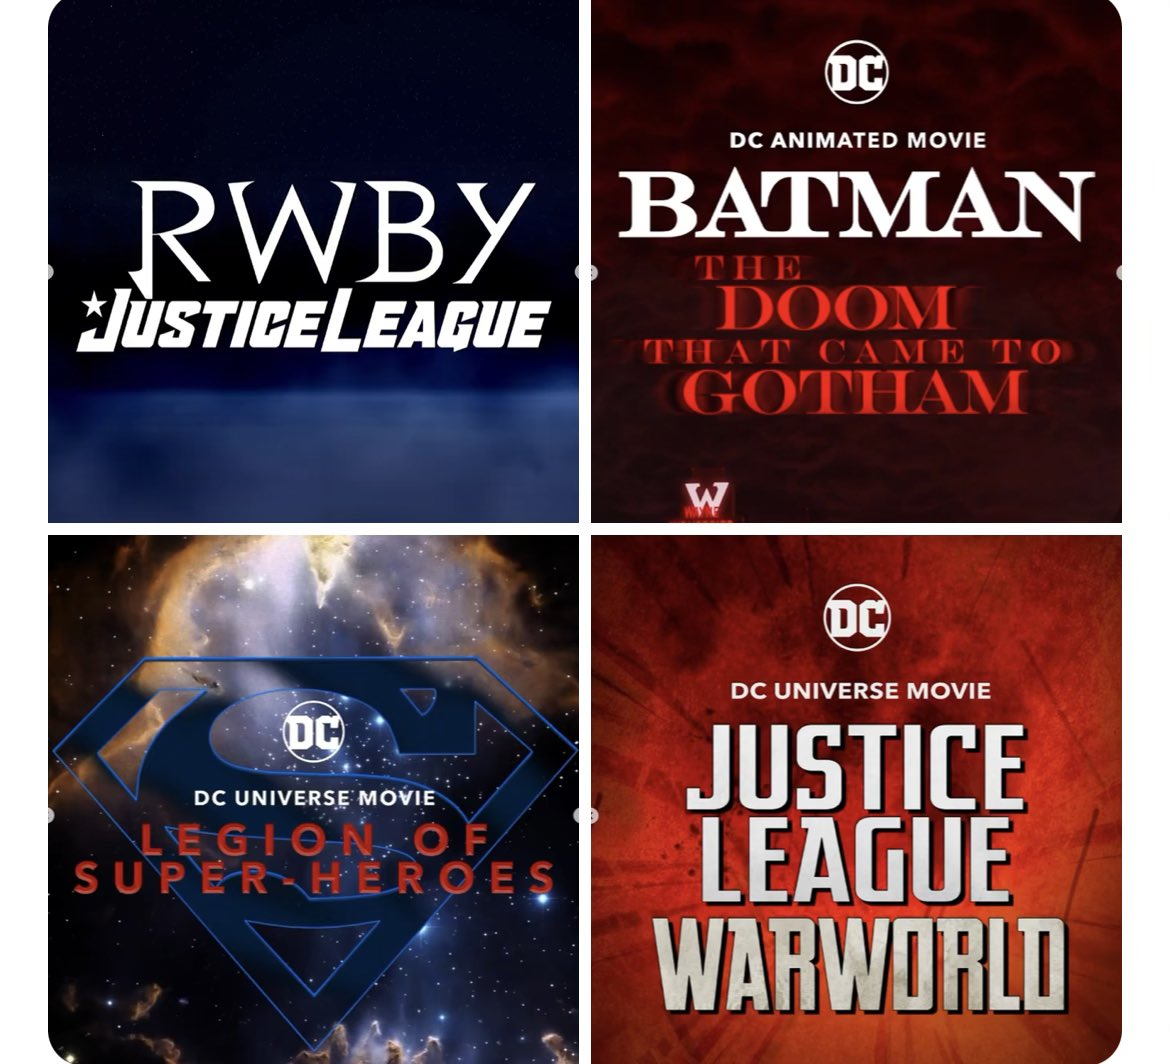 The title slates of DC Animated projects revealed at San Diego Comic-Con 2022:  RWBY Justice league, Batman The Doom That Came to Gotham, Legion of Super-Heroes, and Justice League Warworld